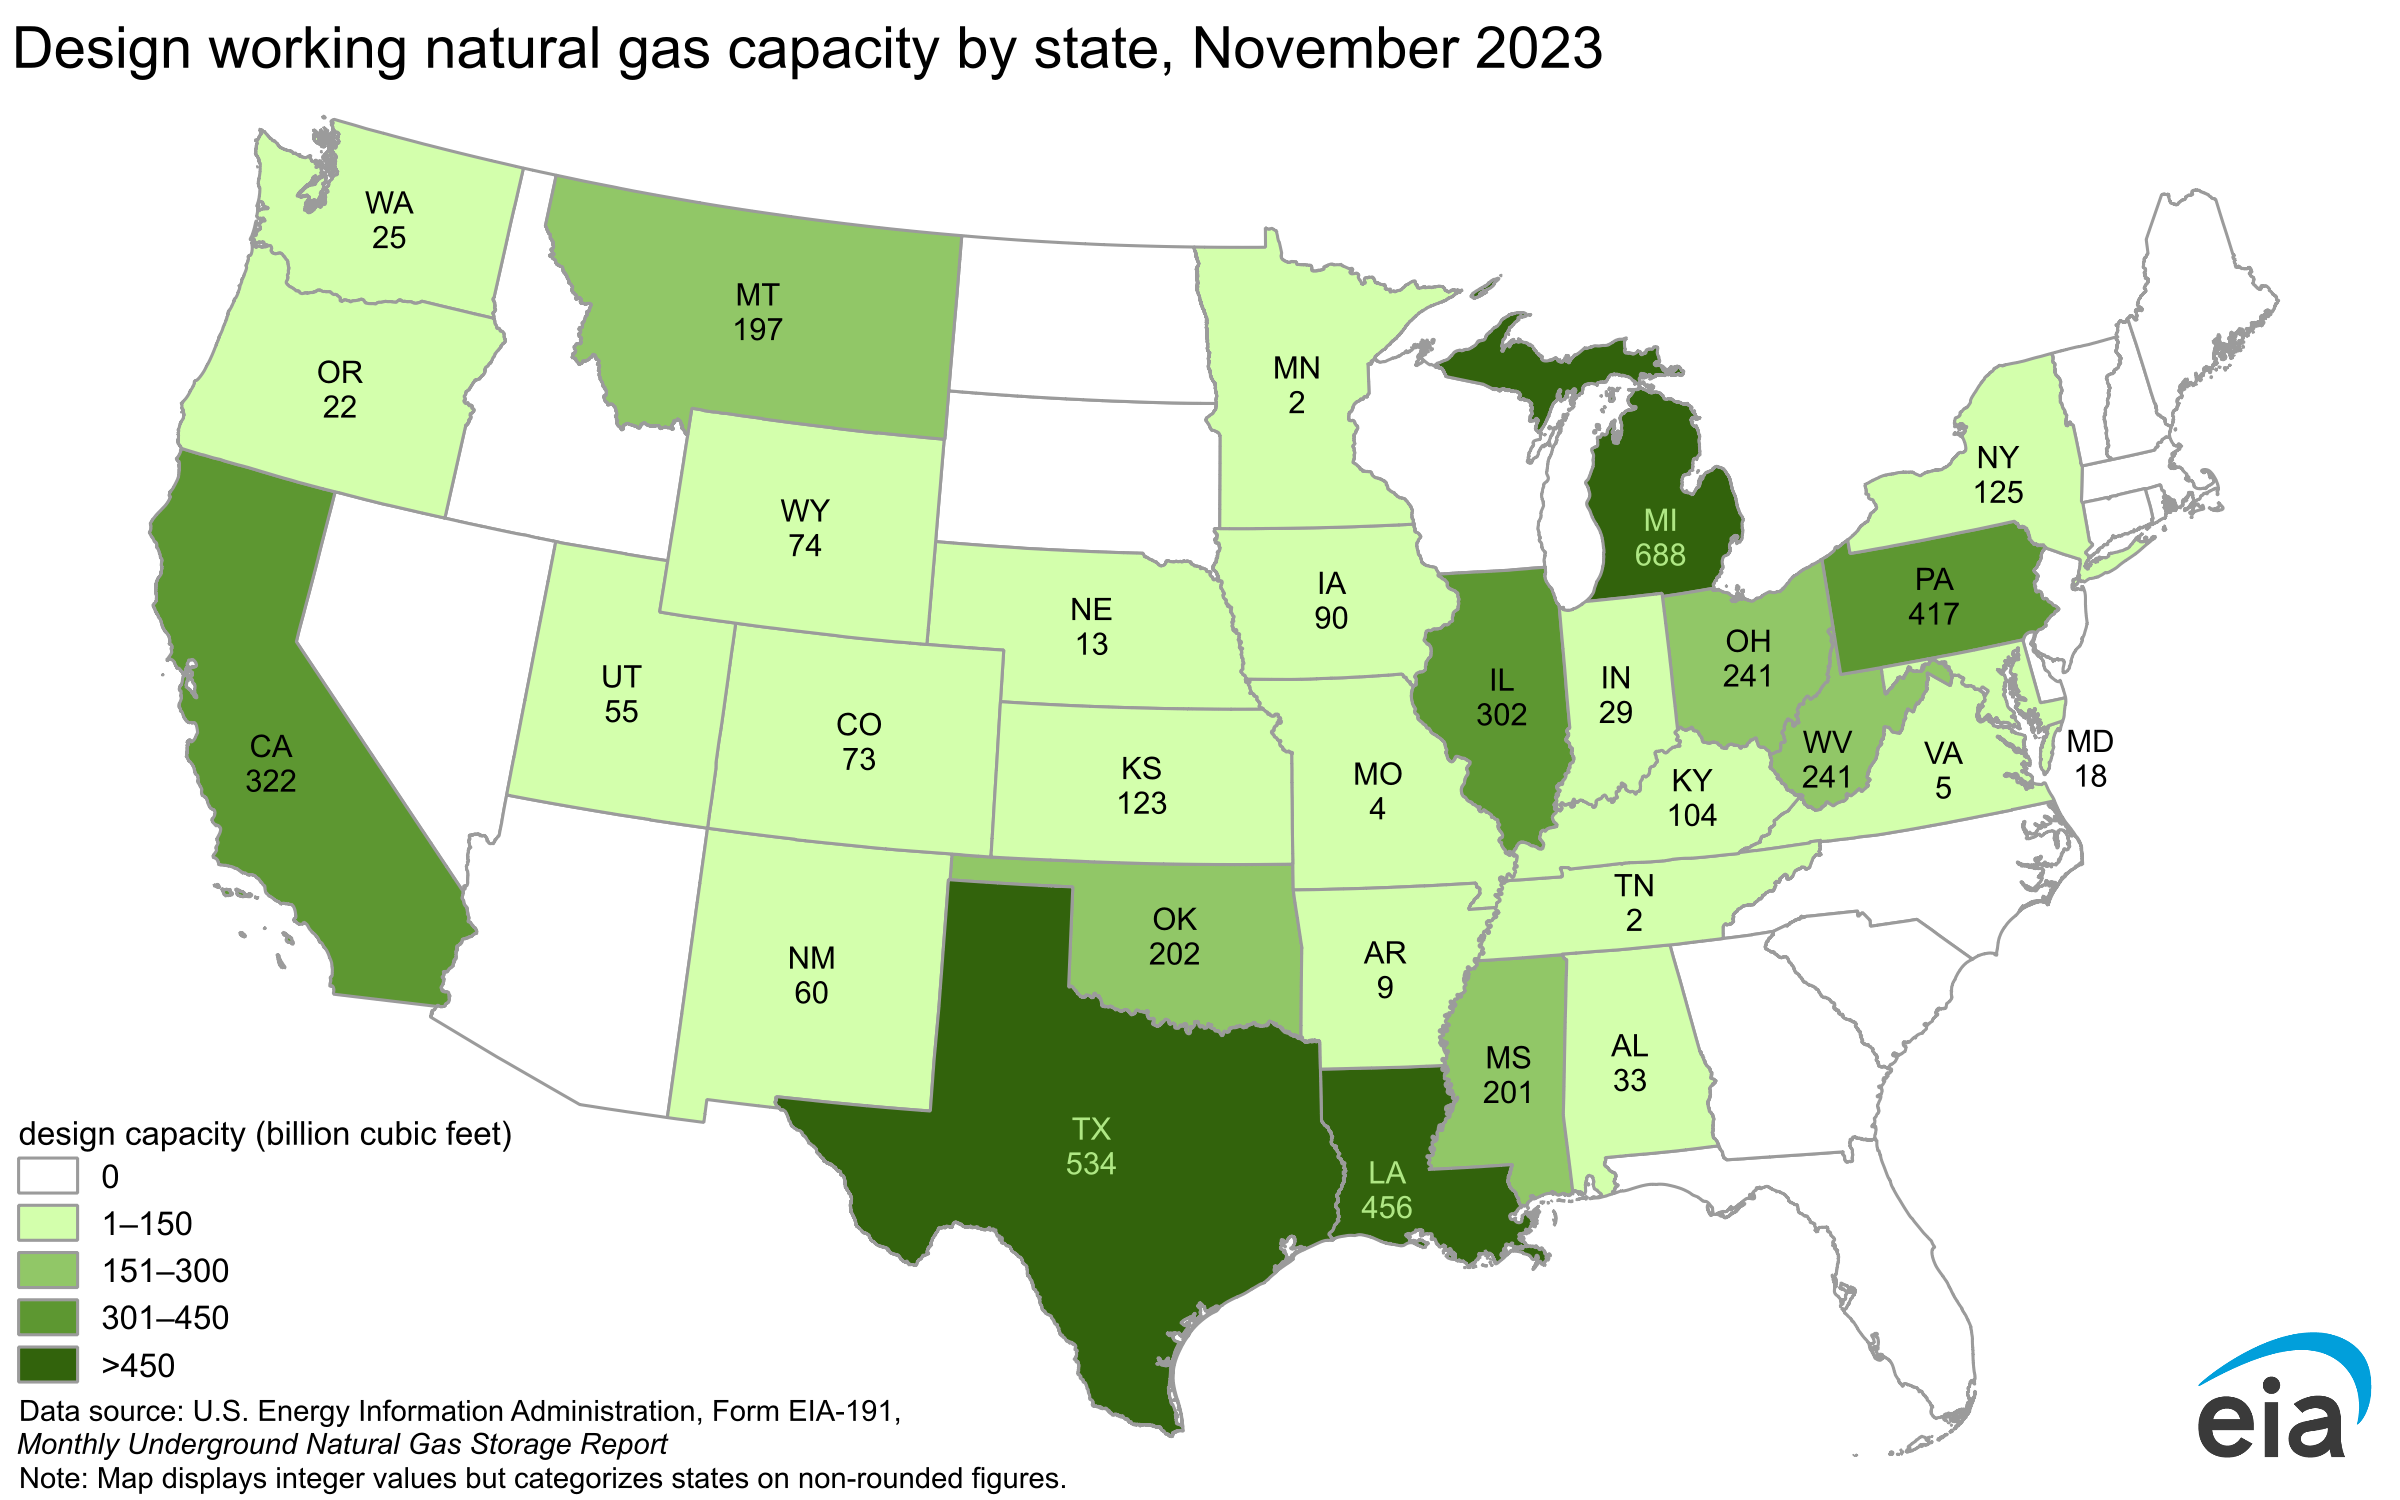 Design working natural gas capacity by state, November 2023